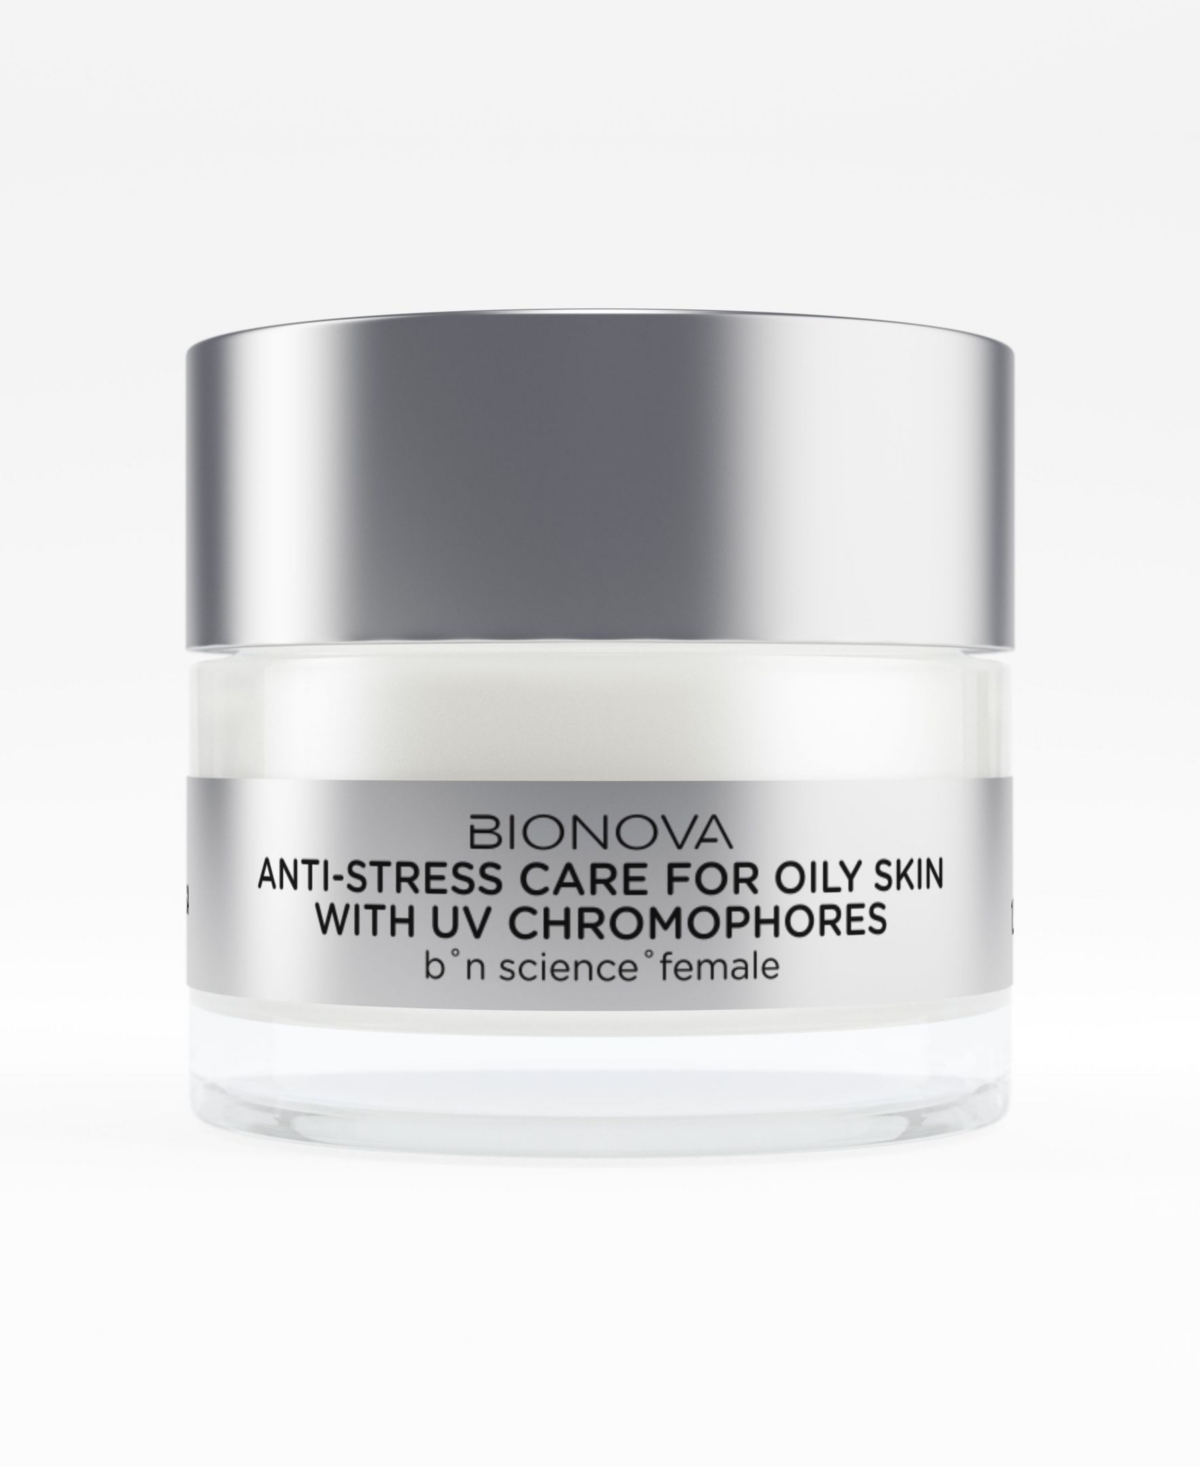 Anti-Stress Care With Uv Chromophores For Oily Skin